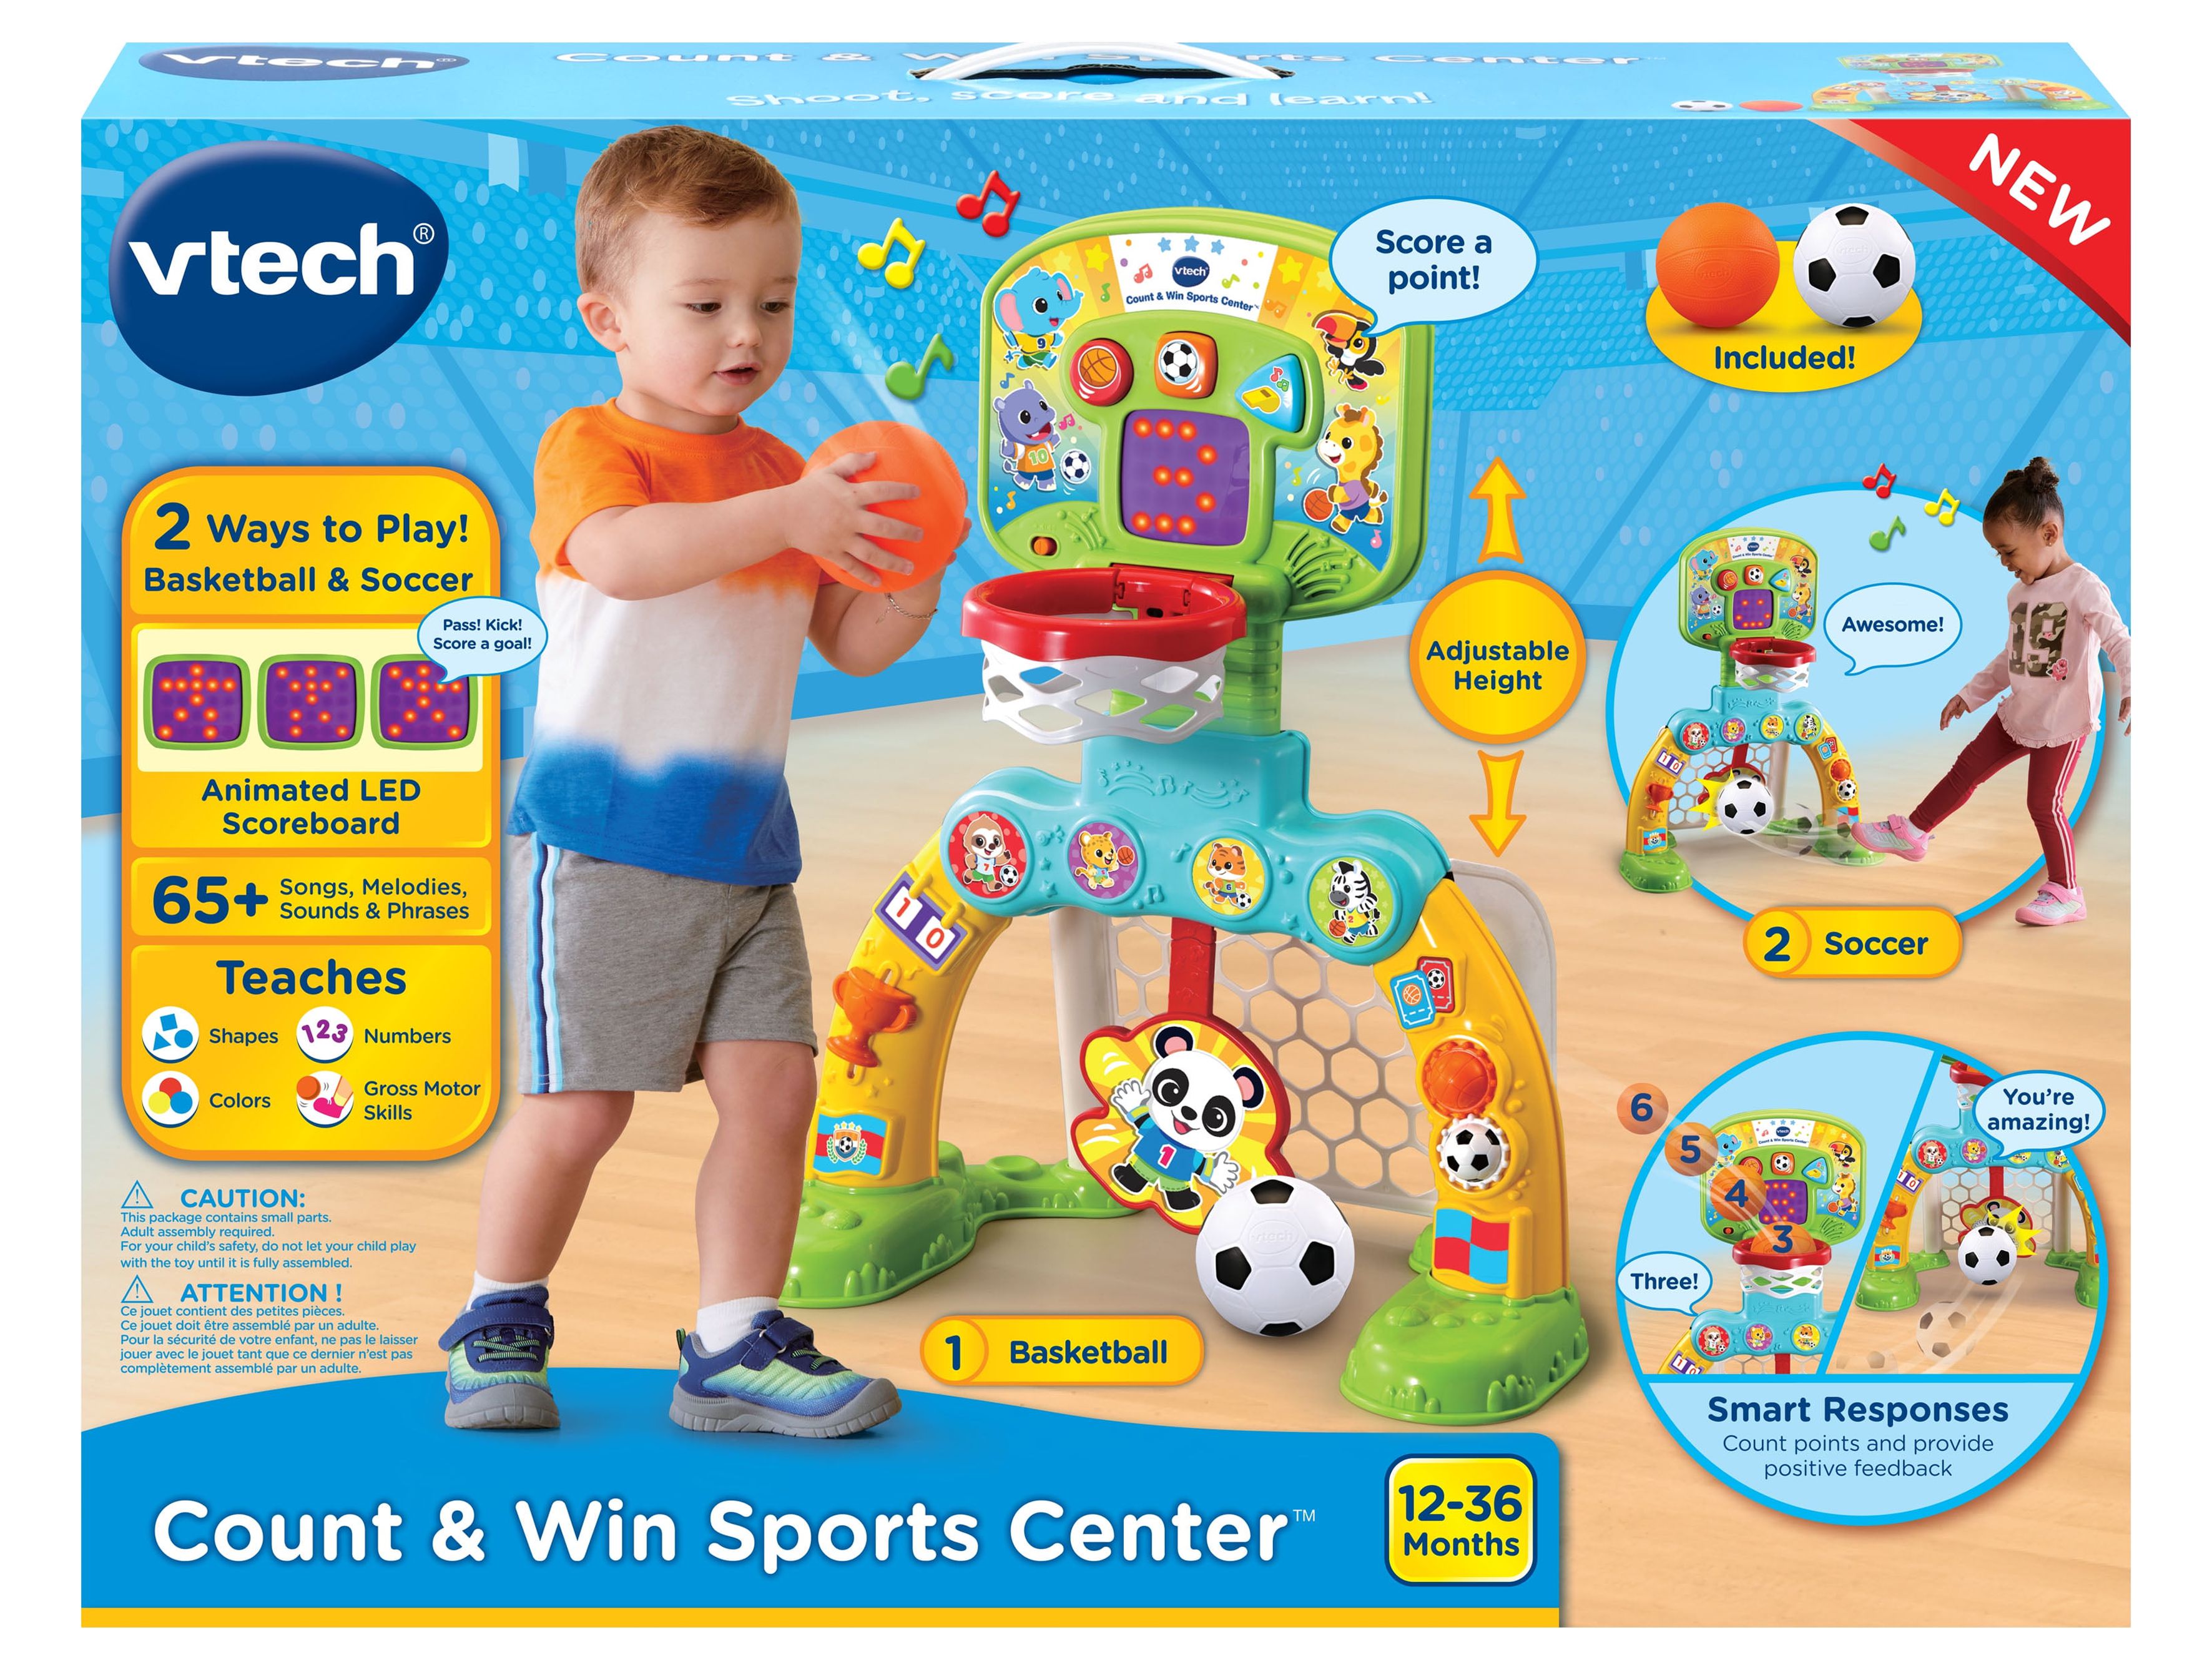 VTech Count & Win Sports Center, Basketball and Soccer Toy for Toddlers, Teaches Physical Activity - image 13 of 13